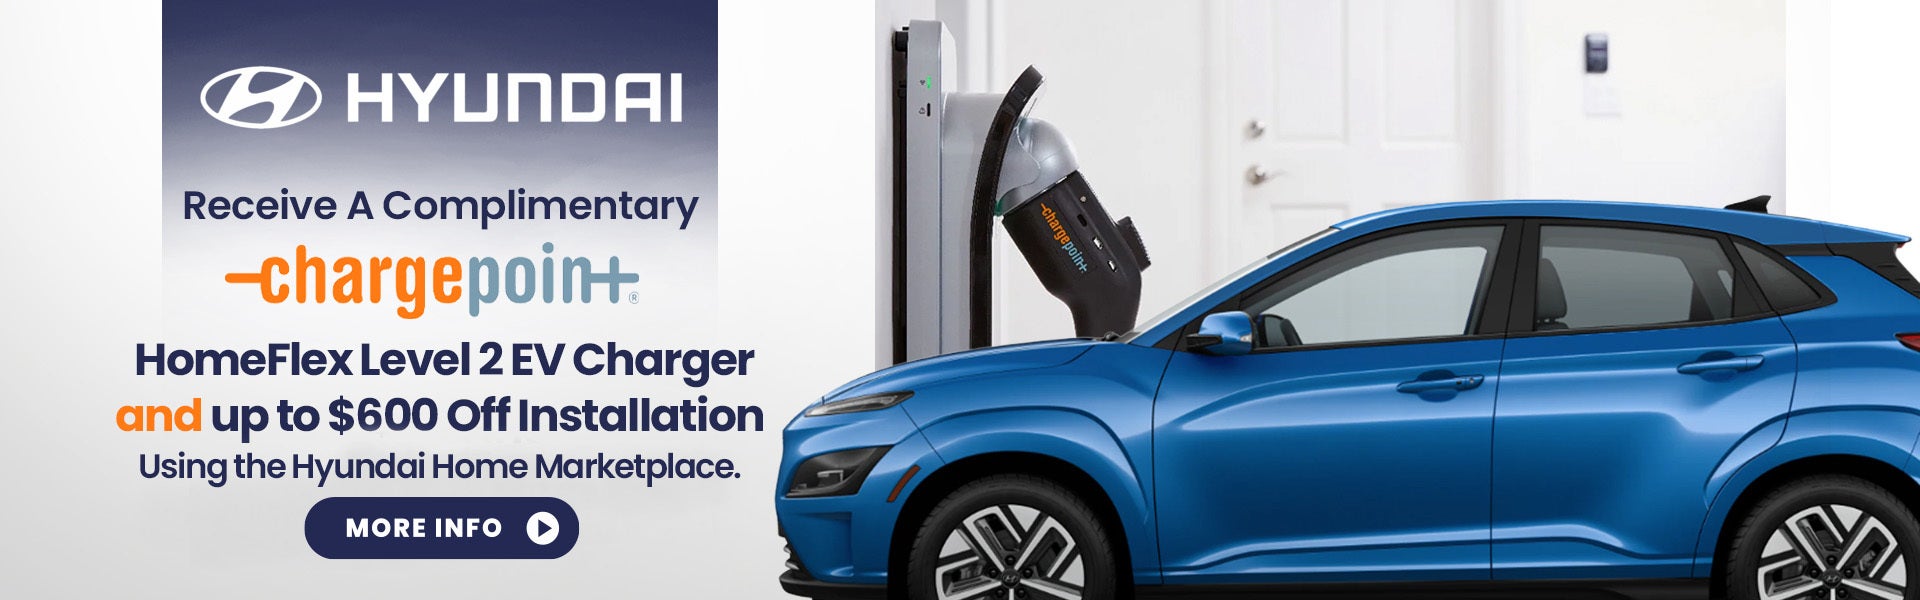 Receive a complimentary charge point